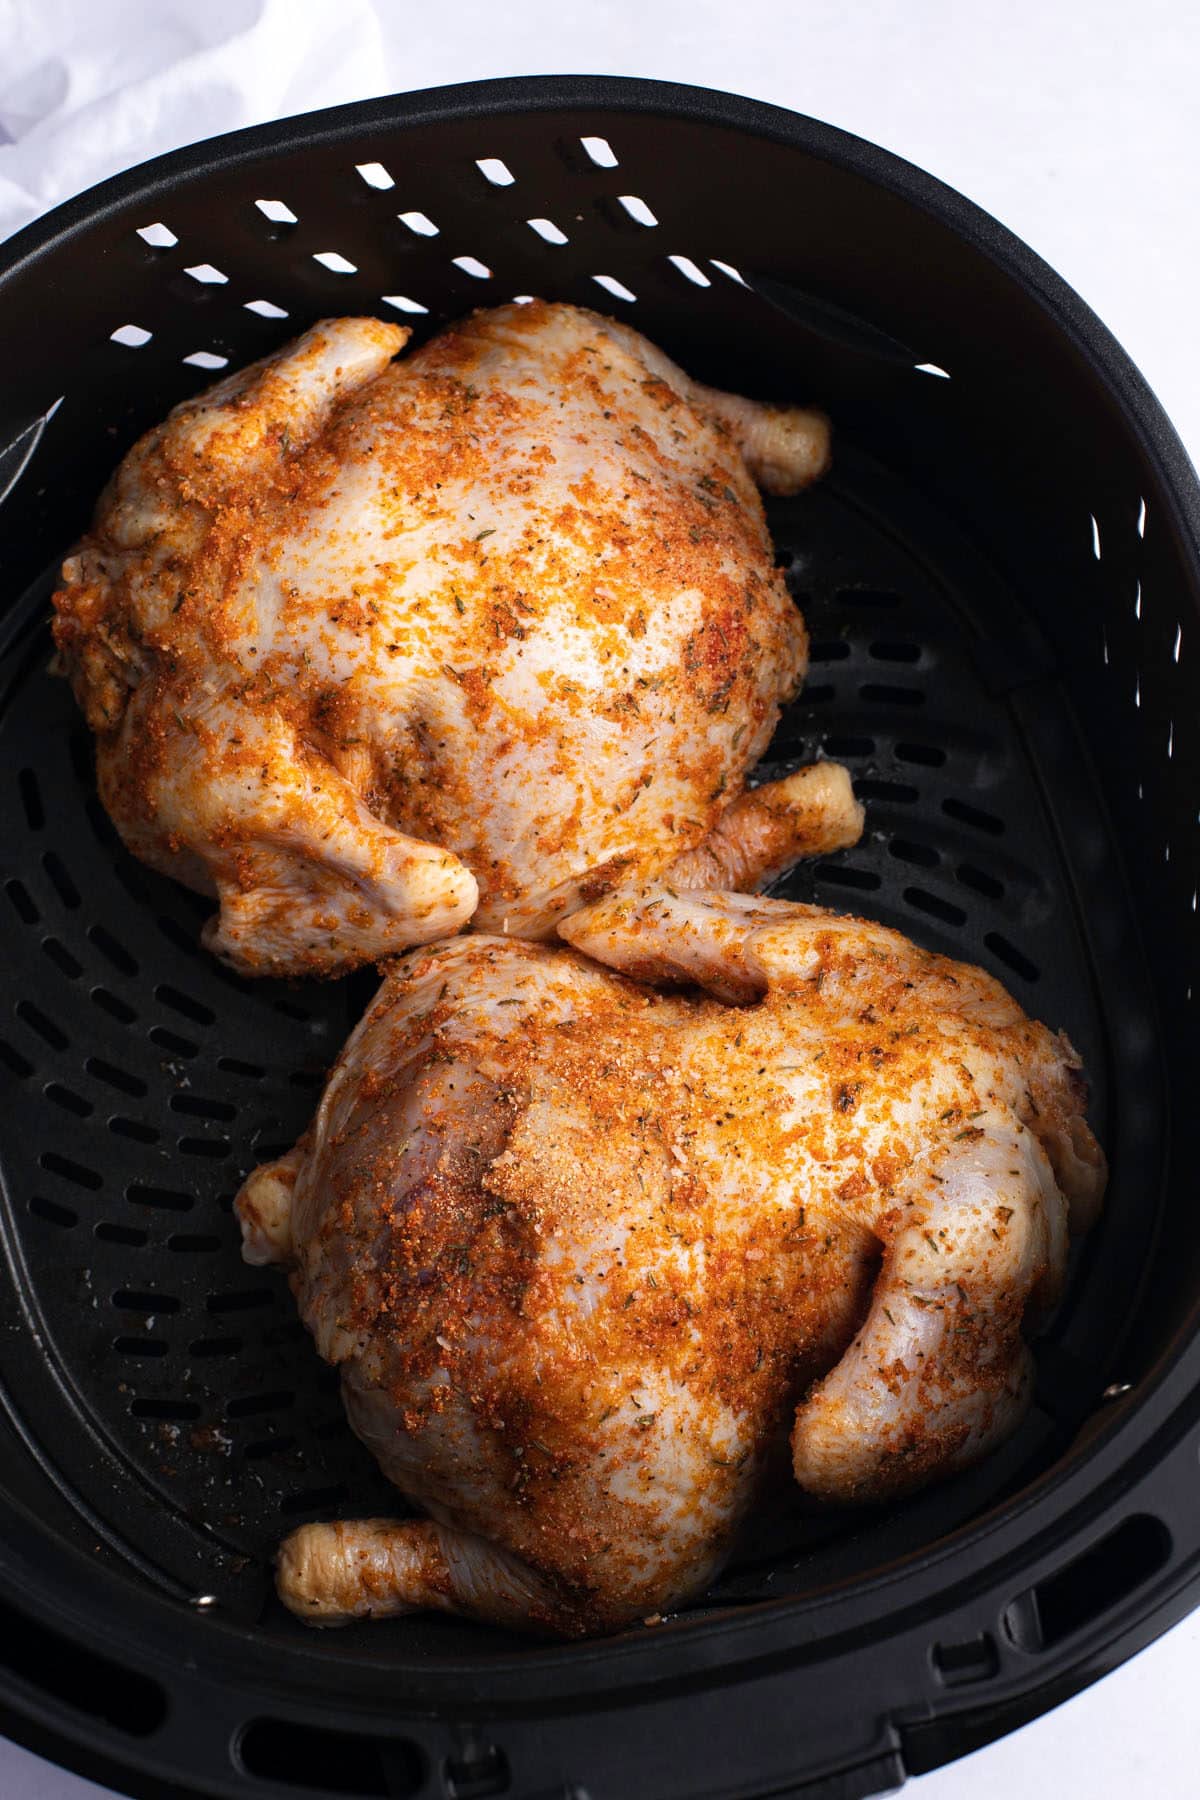 Two cornish hens in the air fryer basket.